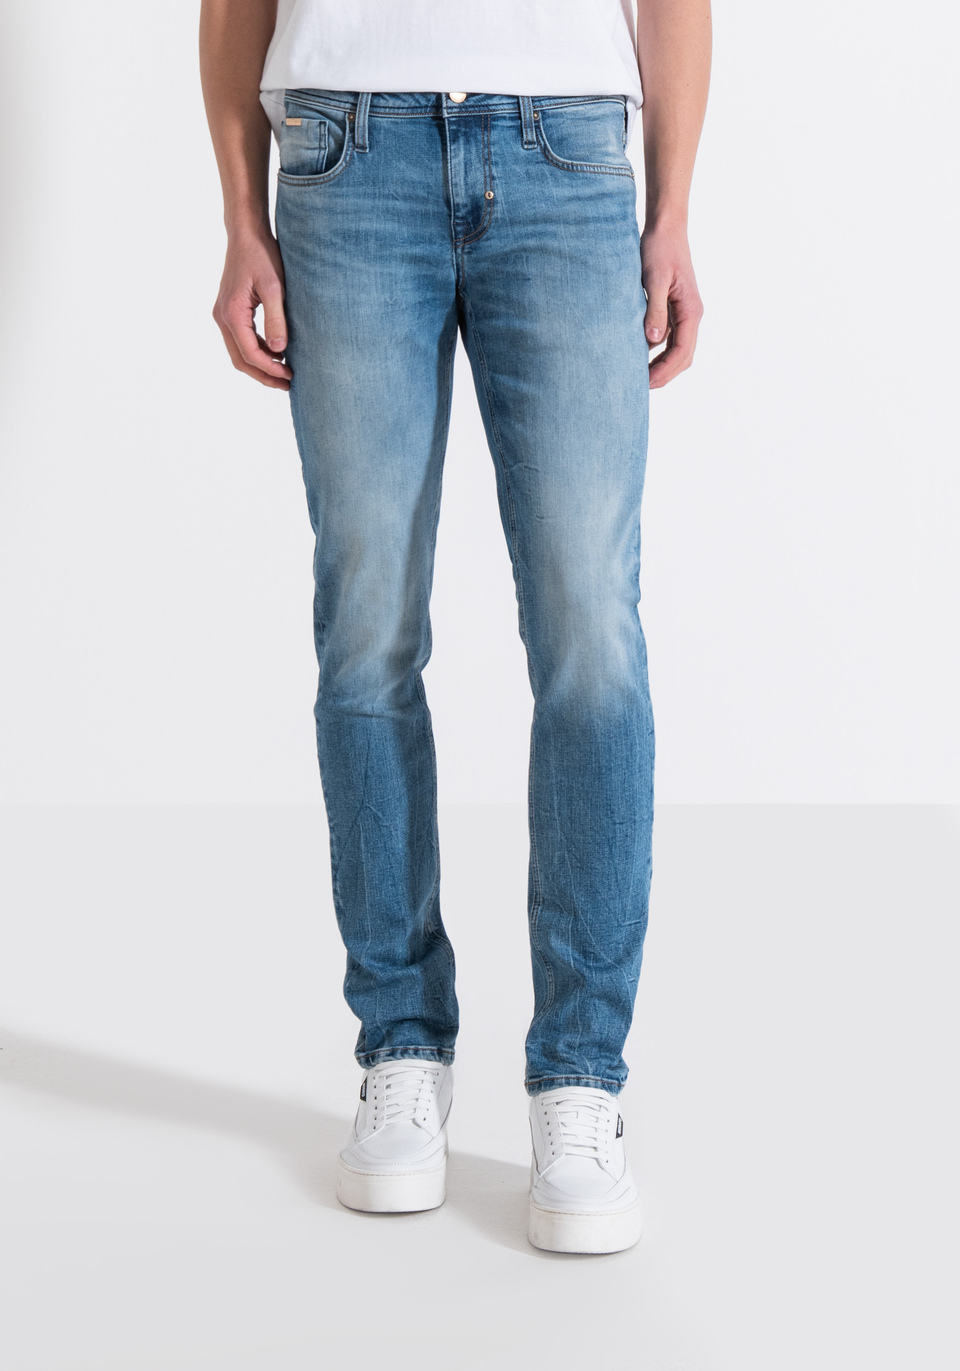 "OZZY" TAPERED JEANS IN GOLD LINE VINTAGE STRETCH DENIM WITH VISIBLE STITCHING - Antony Morato Online Shop